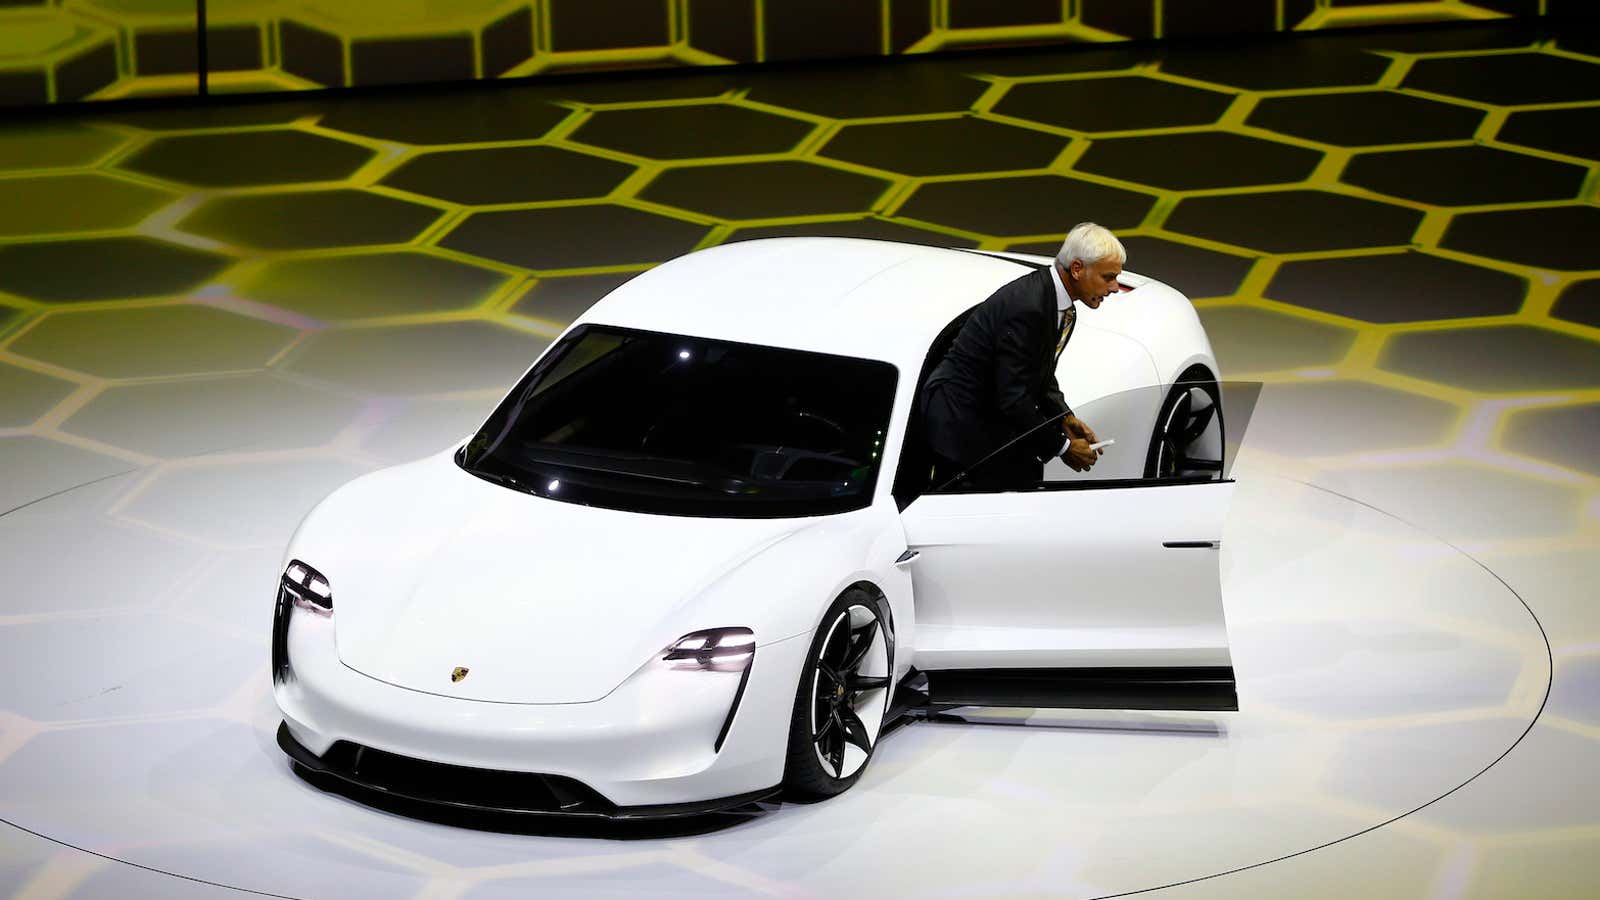 The Mission E, revealed in 2015, becomes a real car—the Taycan—in 2020.